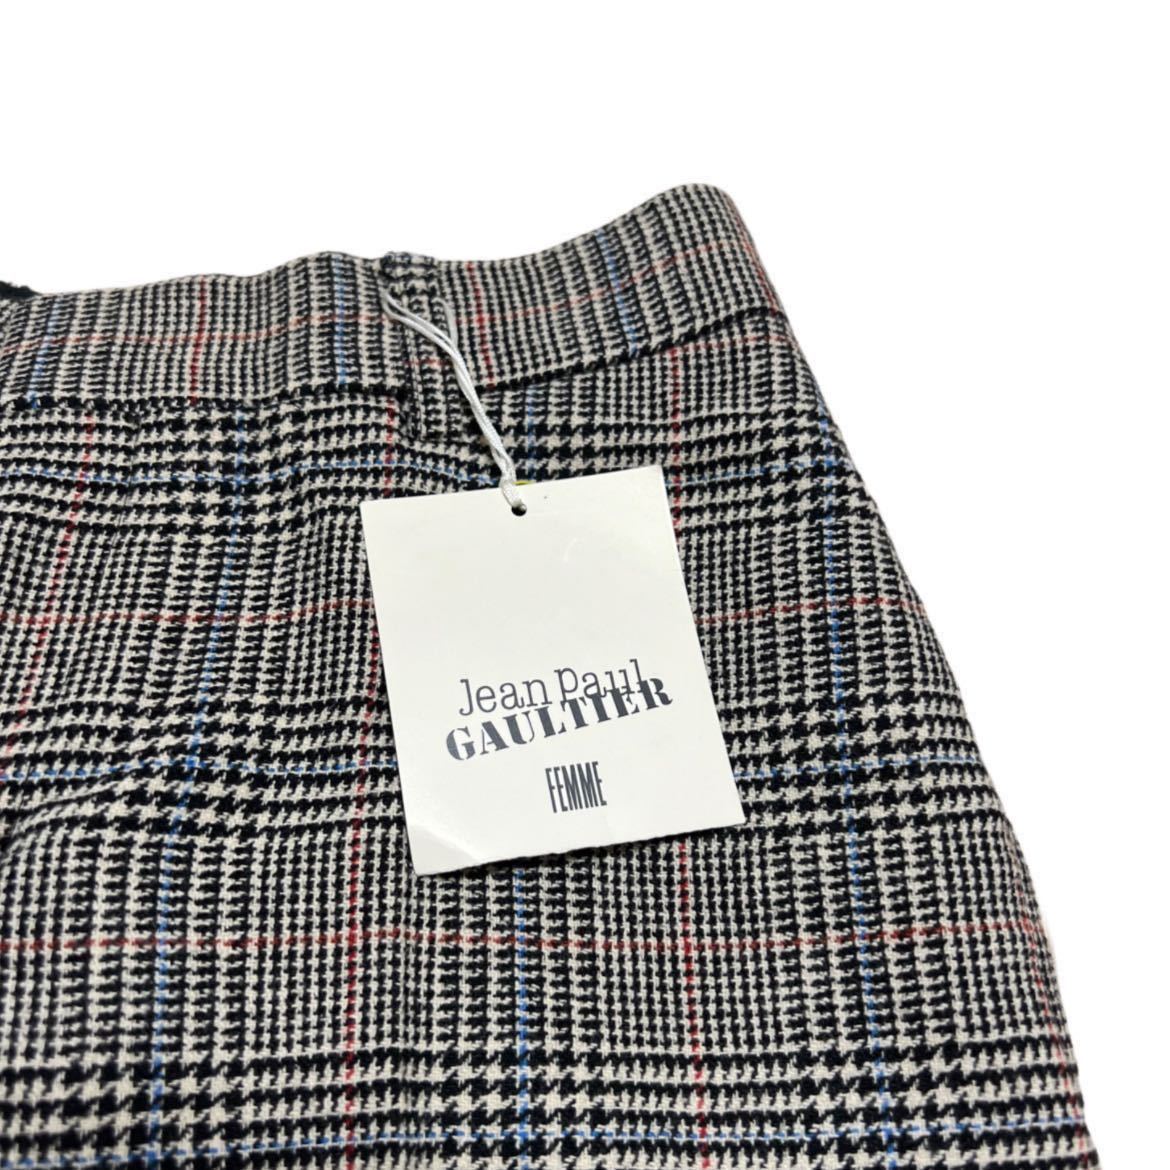 Rare 90s Jean Paul GAULTIER plaid pants Archive dead stock Collection ジャンポールゴルチエ チェック柄 パンツ 未使用 タグ付き 希少_画像3